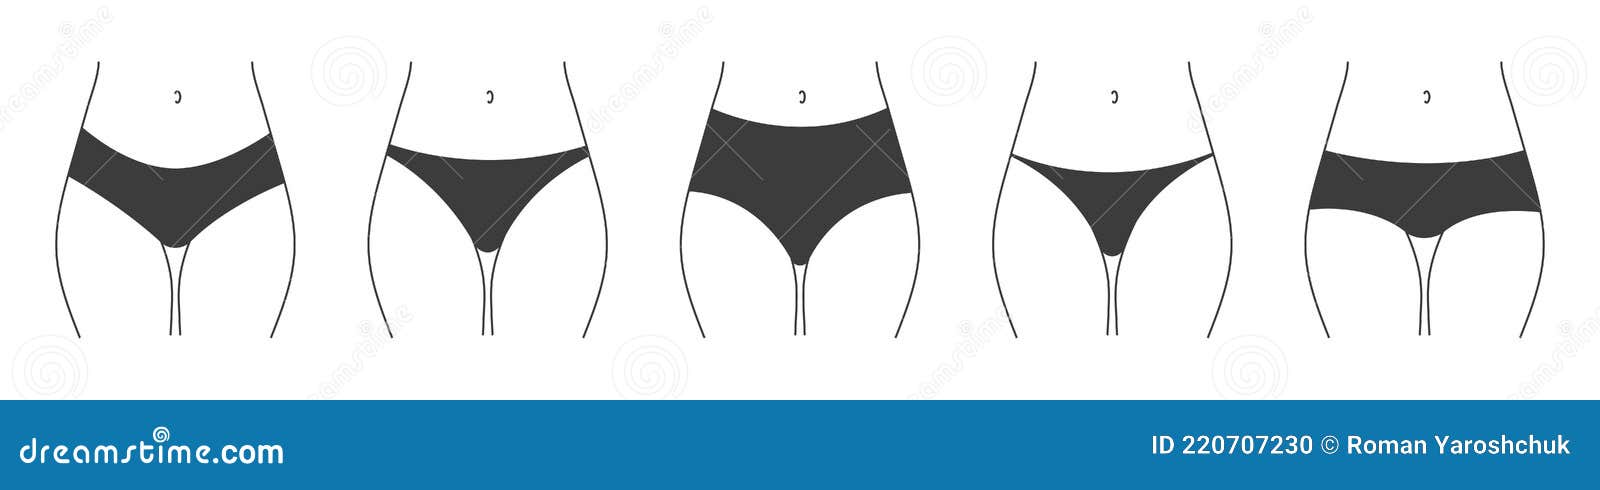 Different Types of Panties. Collection of Lingerie Stock Vector -  Illustration of buttocks, silhouette: 220707230